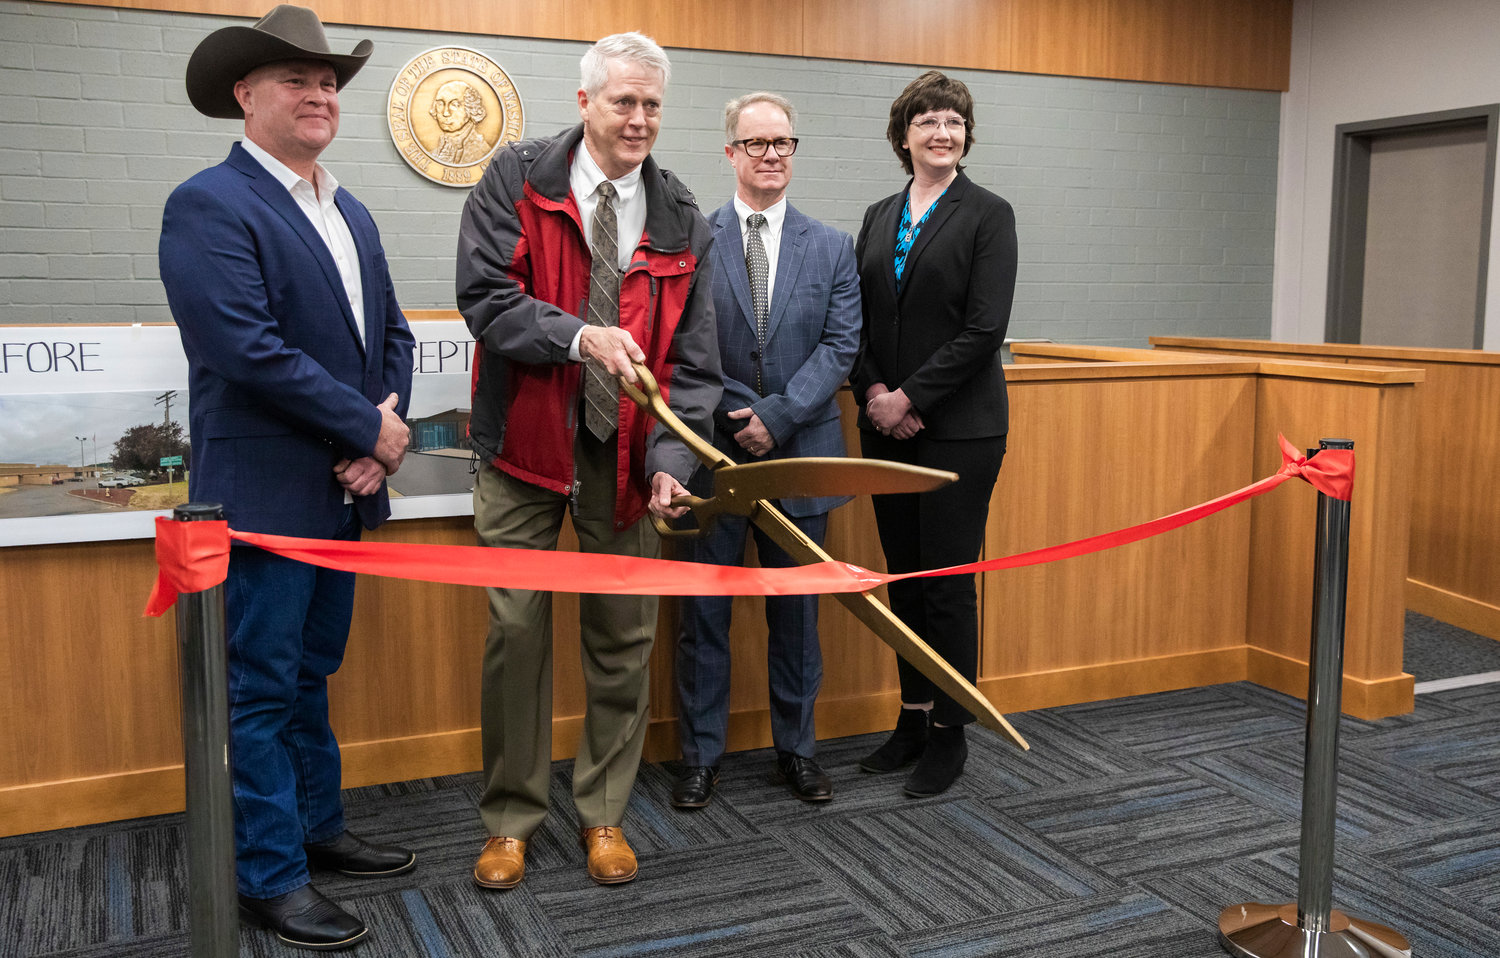 From left, Commissioner Scott Brummer, Judge James W. Lawler, Judge J. Andrew Toynbee and Commissioner Lindsey Pollock smile for a photo during a ribbon cutting ceremony at the Lewis County Juvenile Justice Center in Chehalis Friday morning.